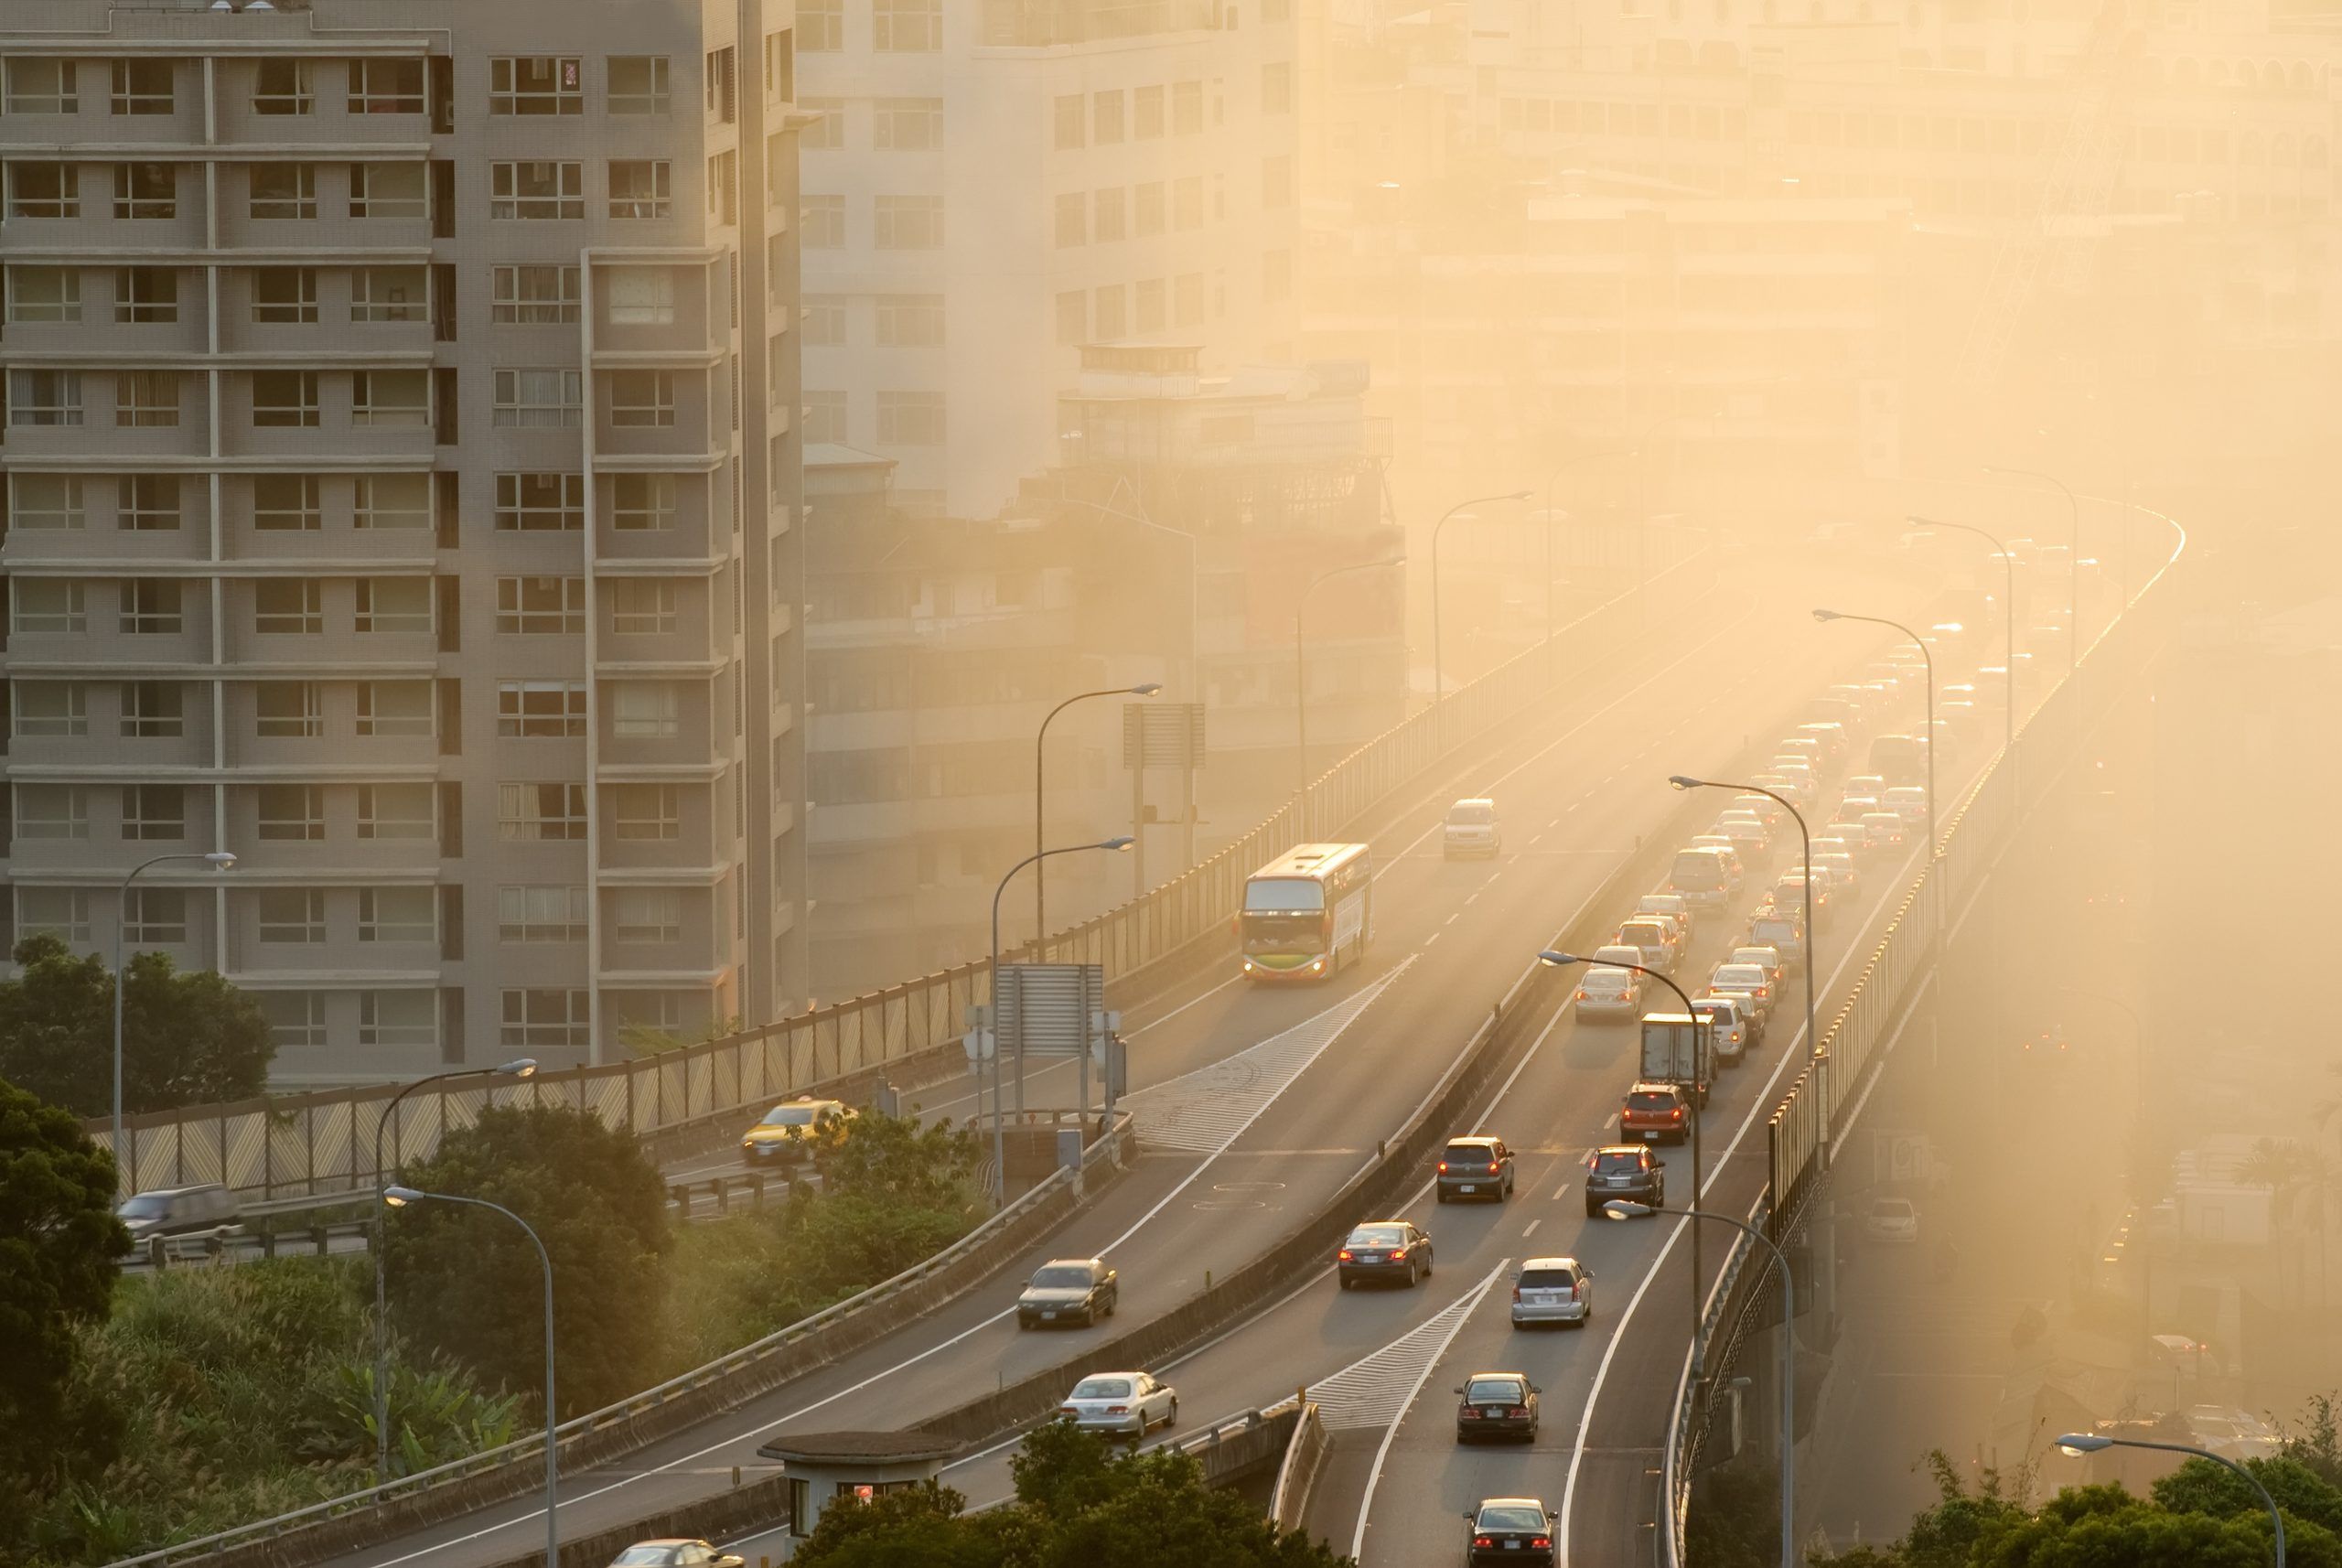 Could air pollution be making your allergies even worse?